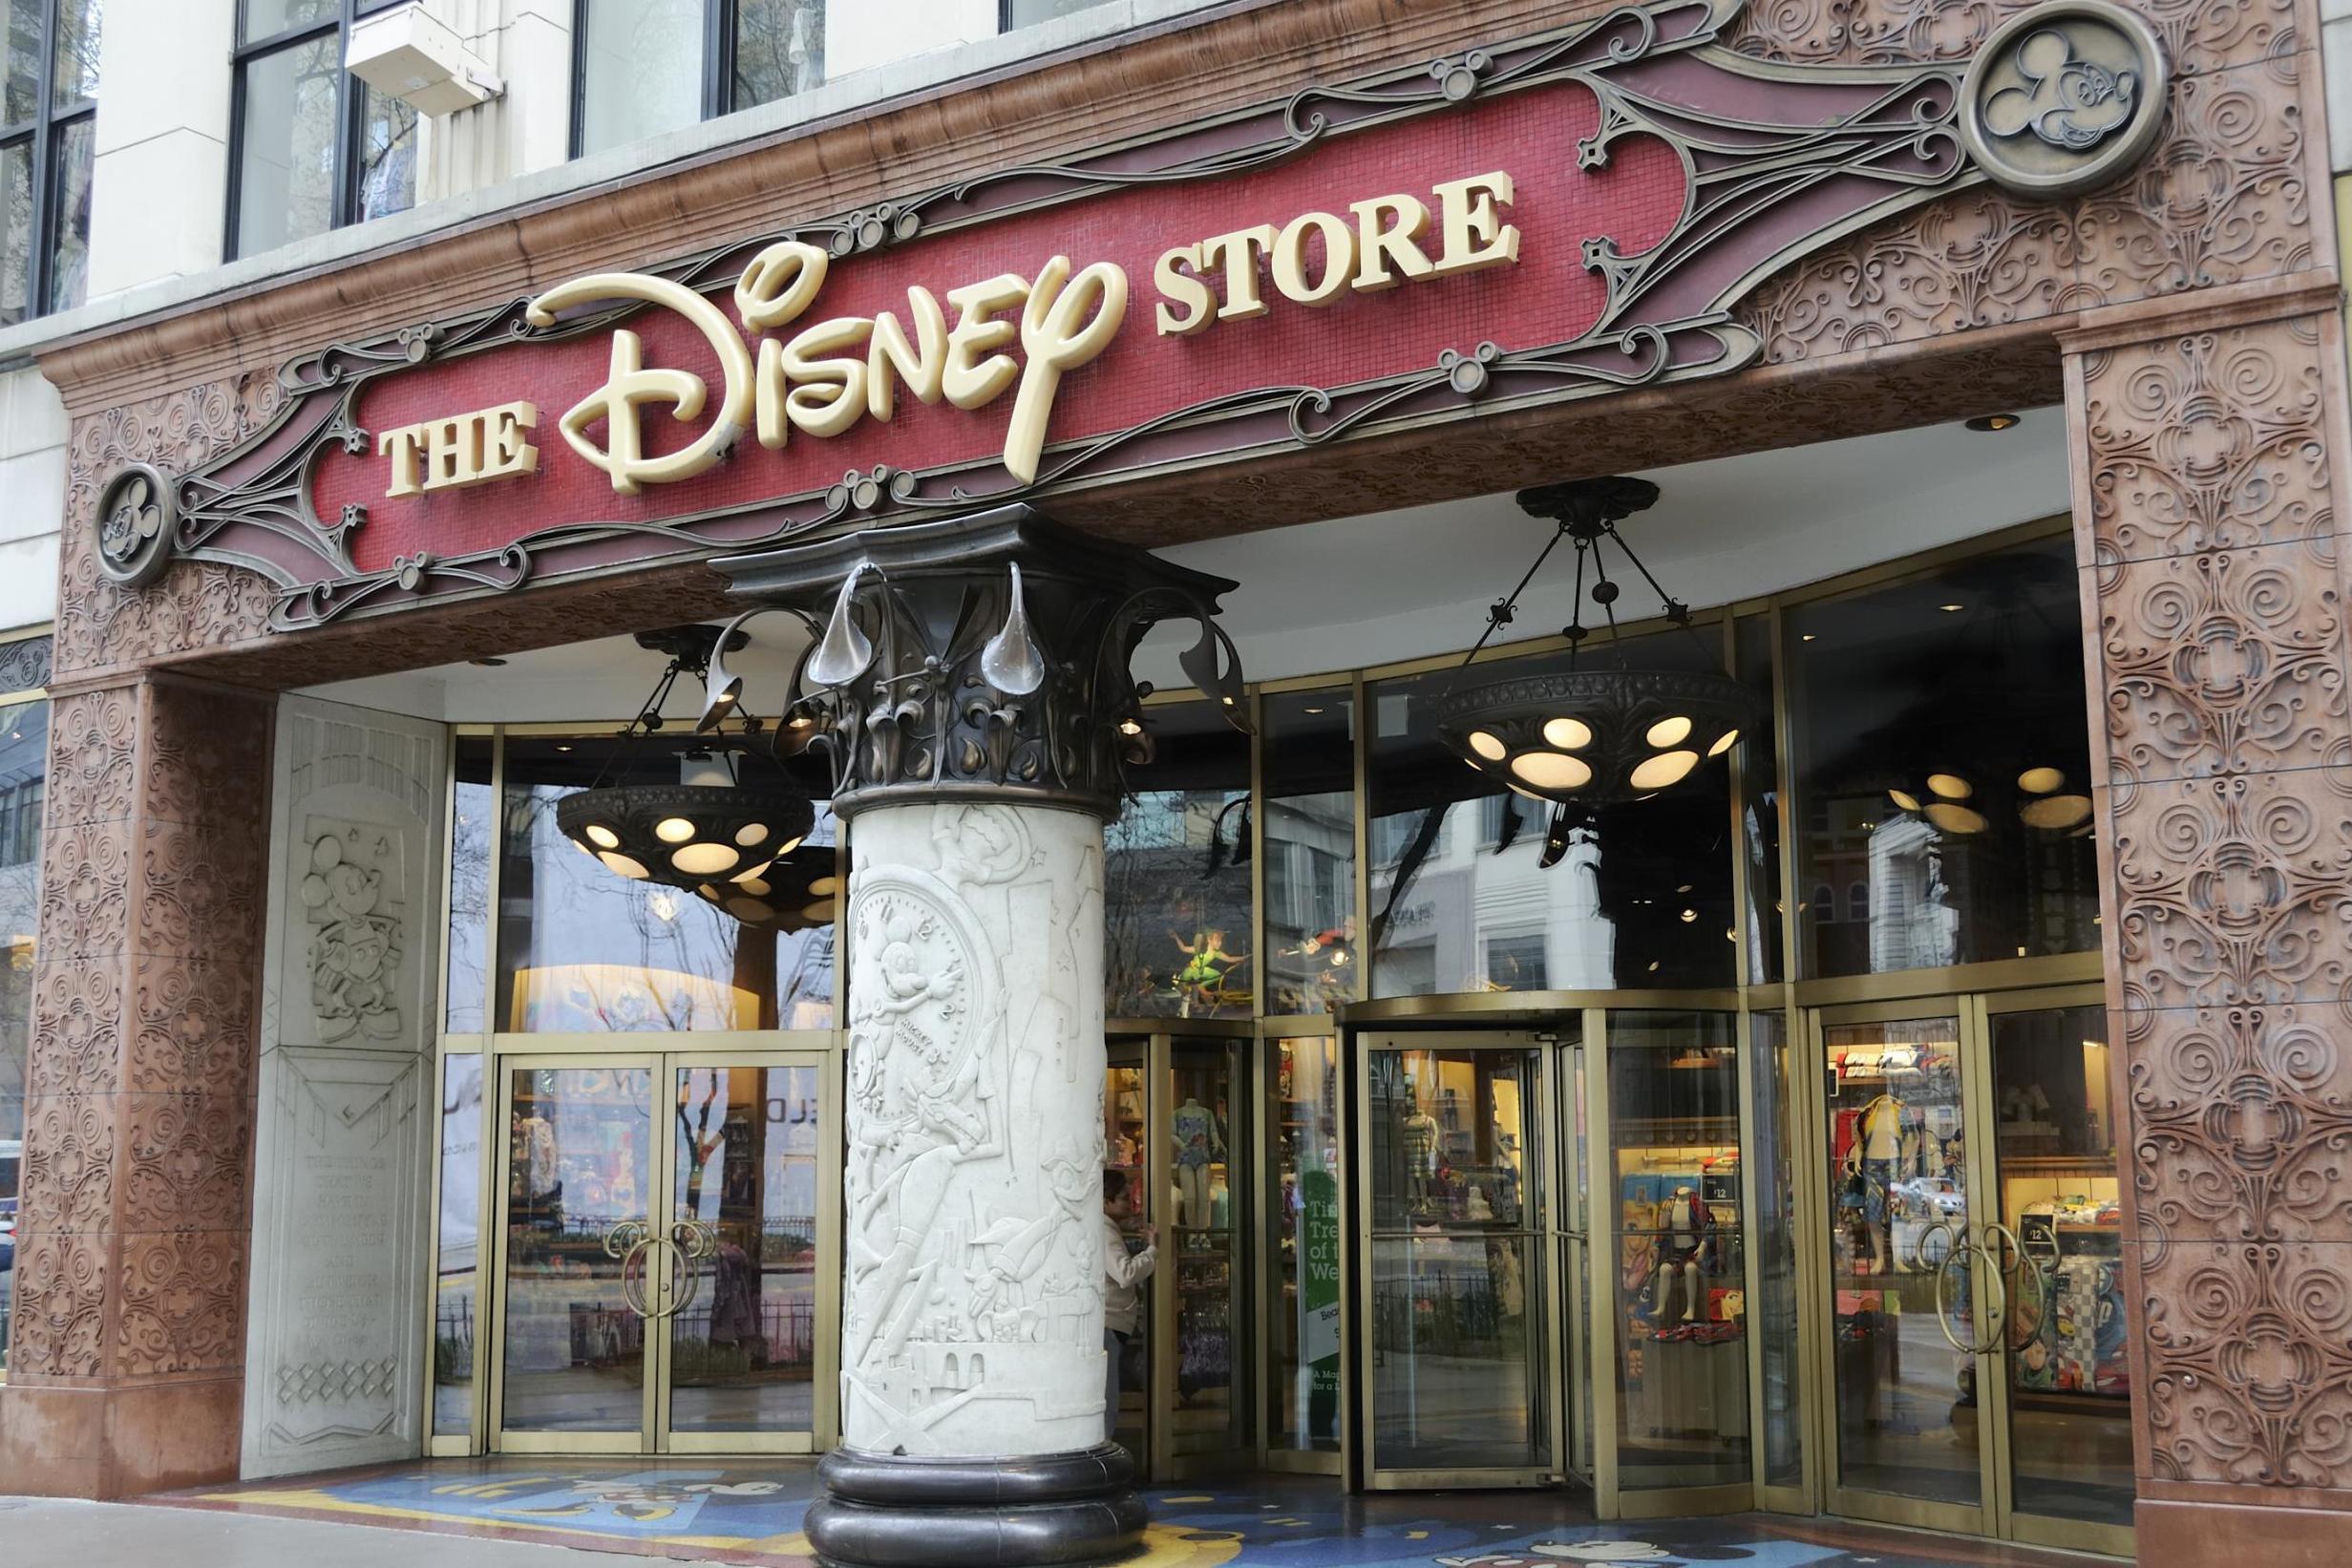 Family says they were asked to leave Disney Store because child with autism couldn't keep mask on